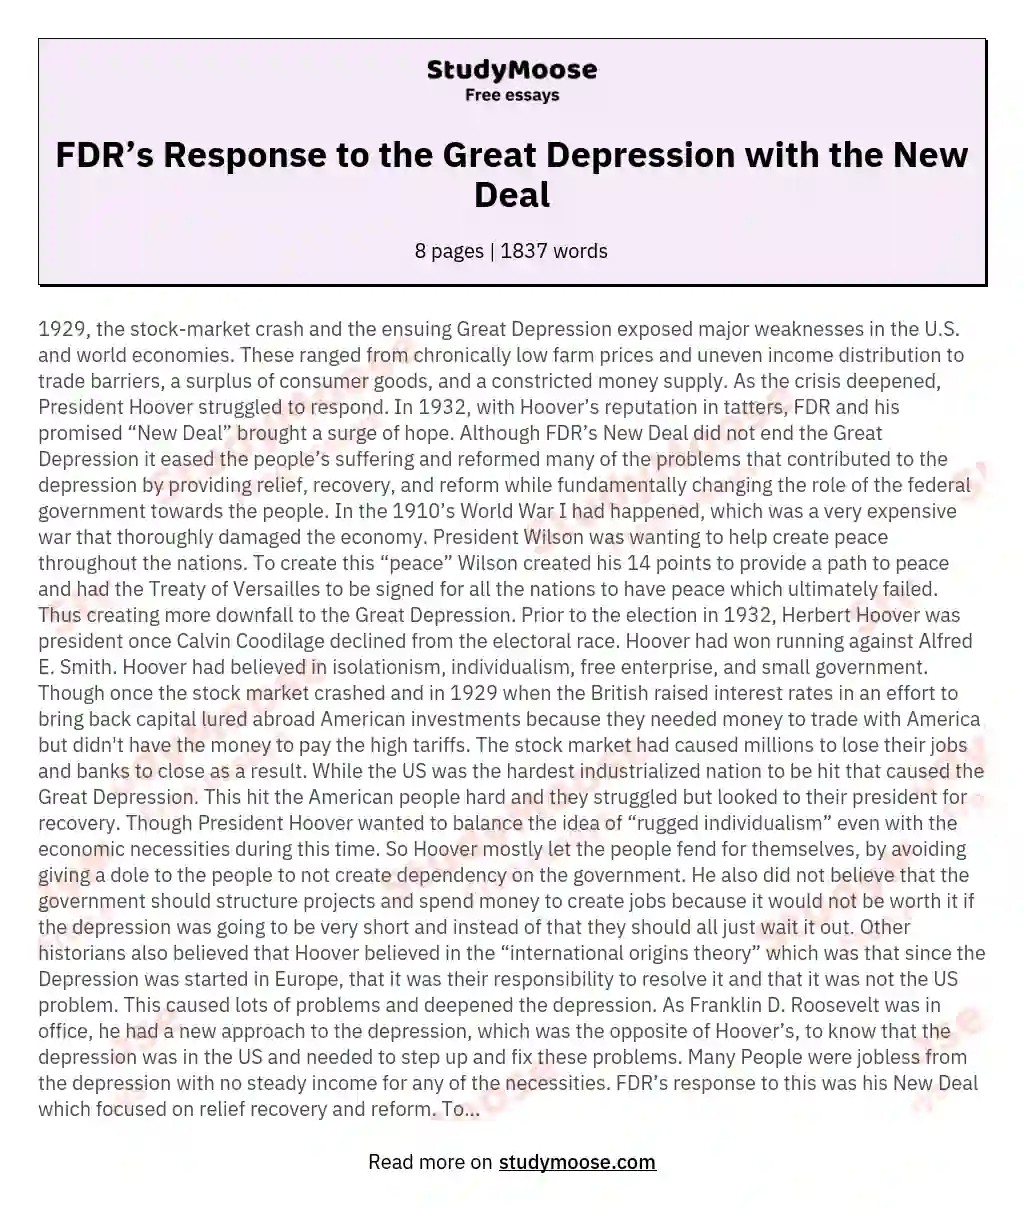 FDR’s Response to the Great Depression with the New Deal